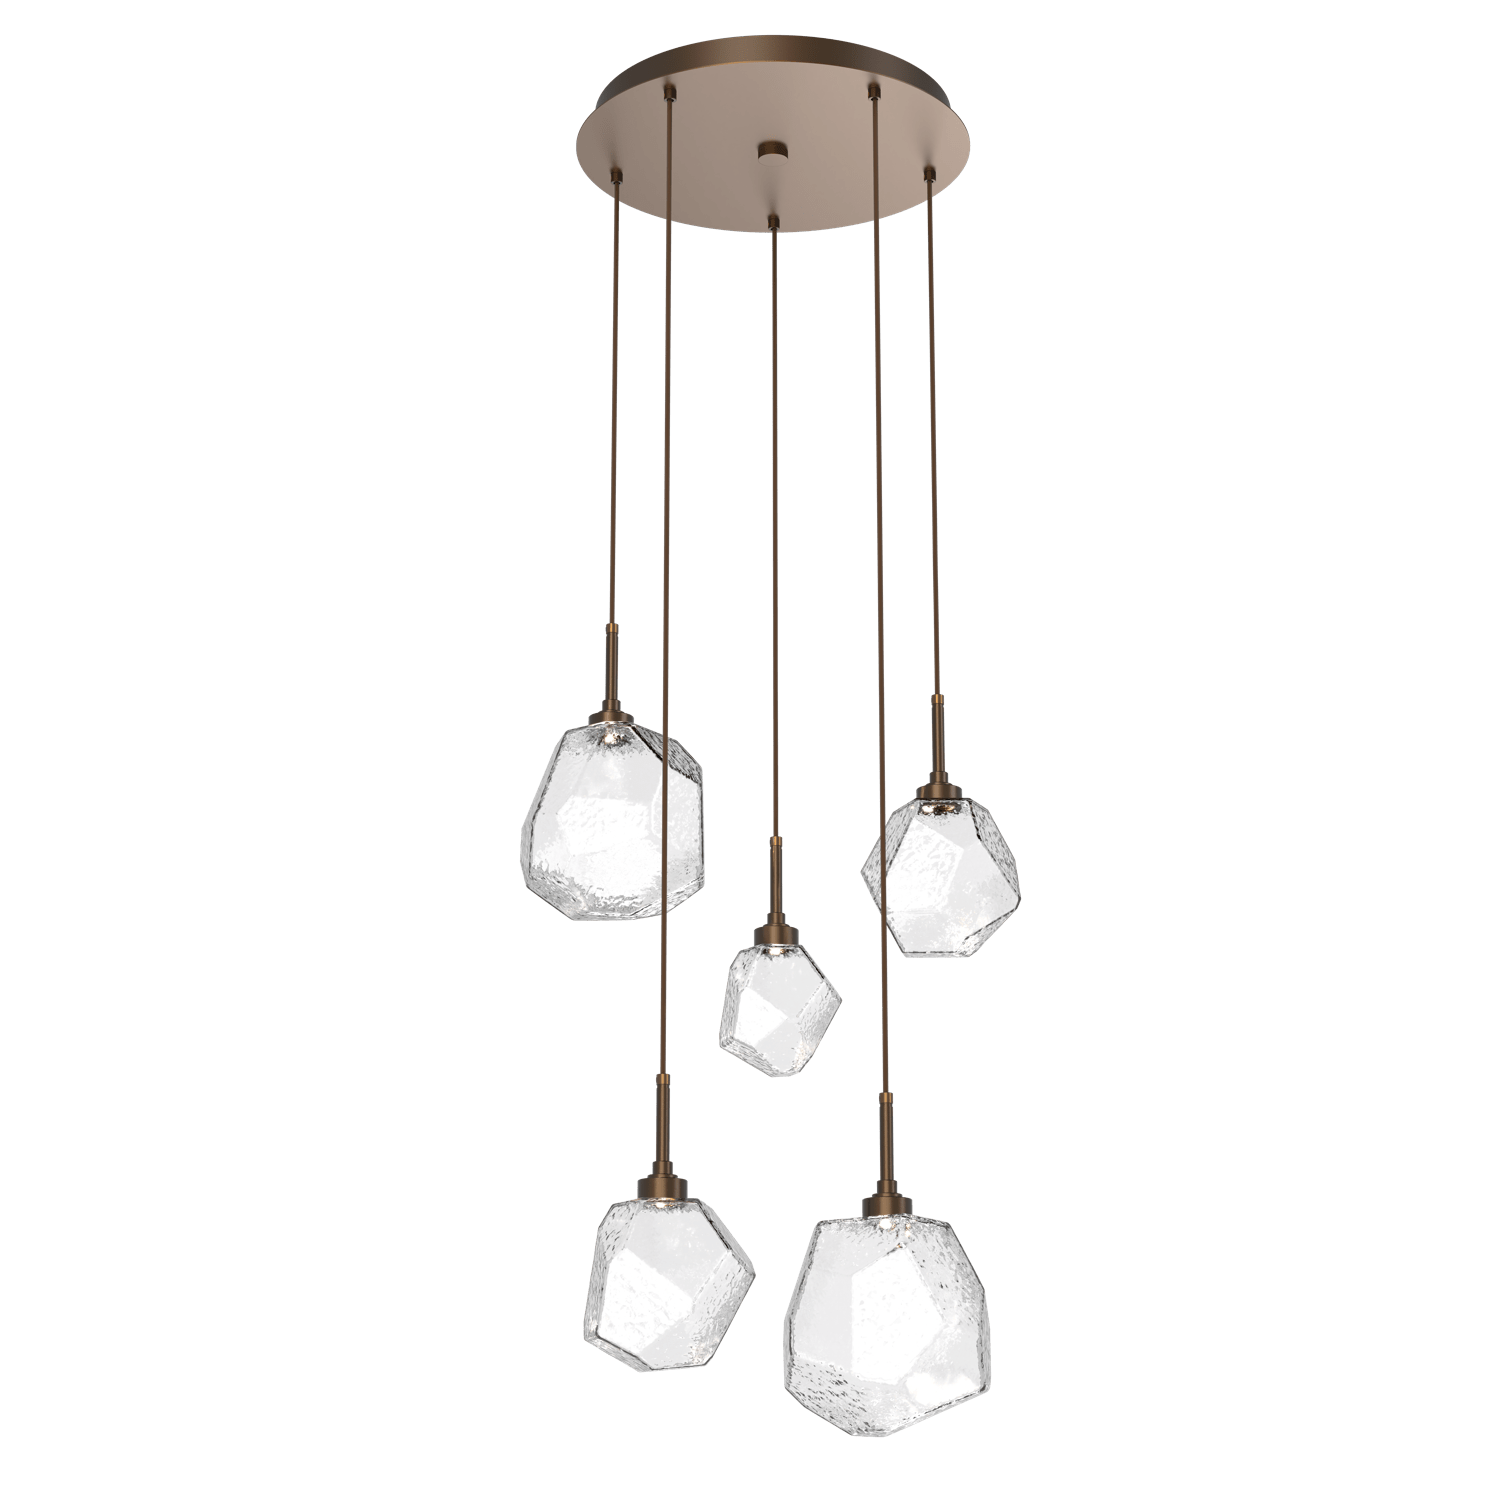 CHB0039-05-FB-C-Hammerton-Studio-Gem-5-light-round-pendant-chandelier-with-flat-bronze-finish-and-clear-blown-glass-shades-and-LED-lamping